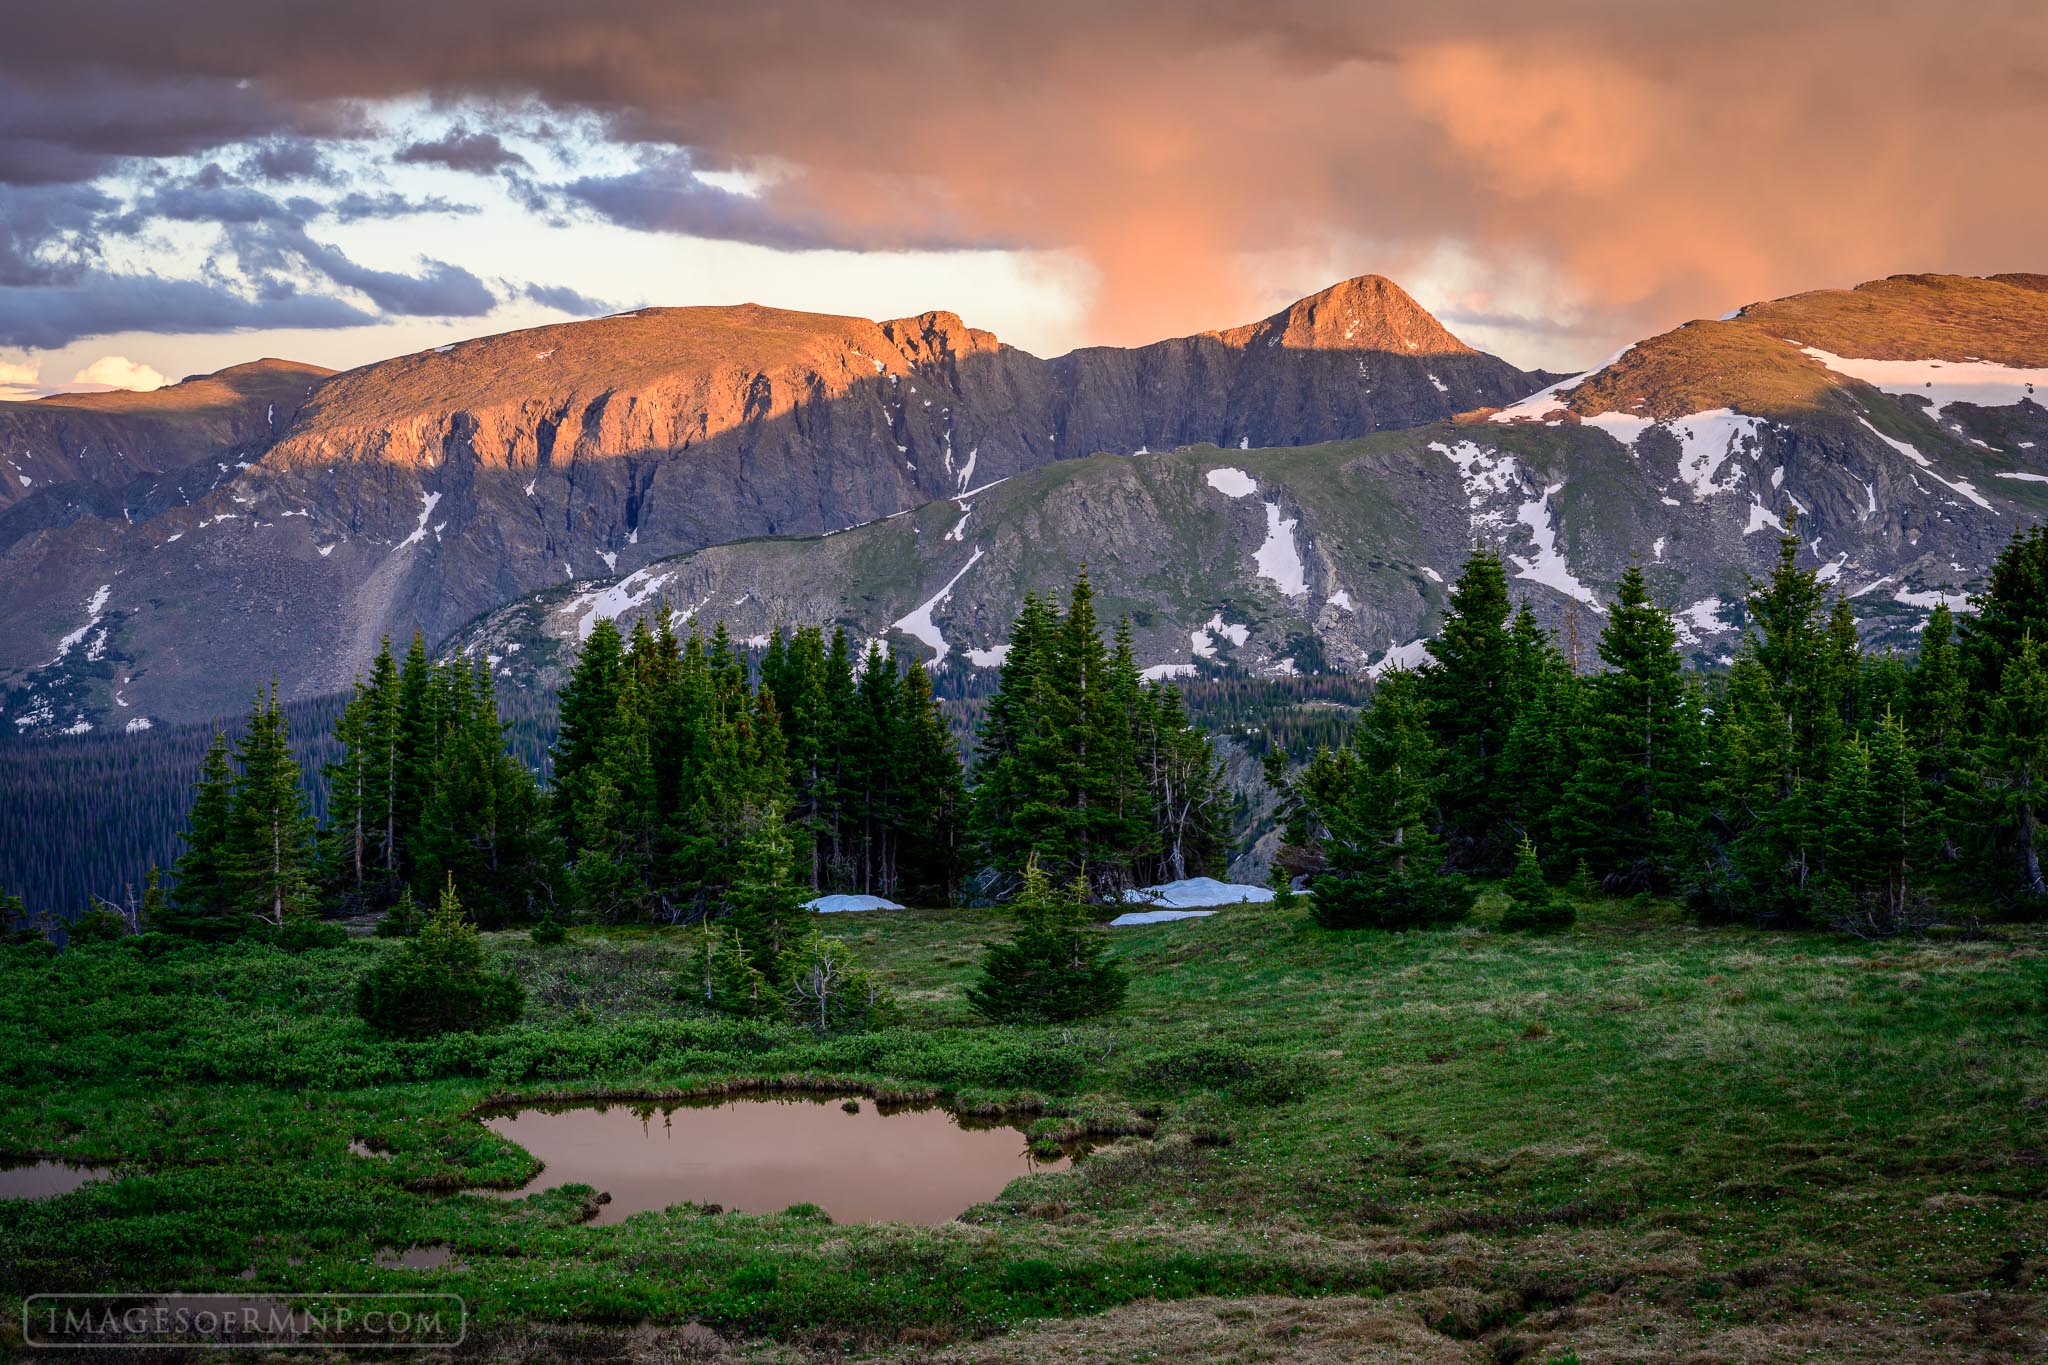 I spent this evening at tree line at the end of a perfect July day. Snow still clung to the peaks and was even to be found in...